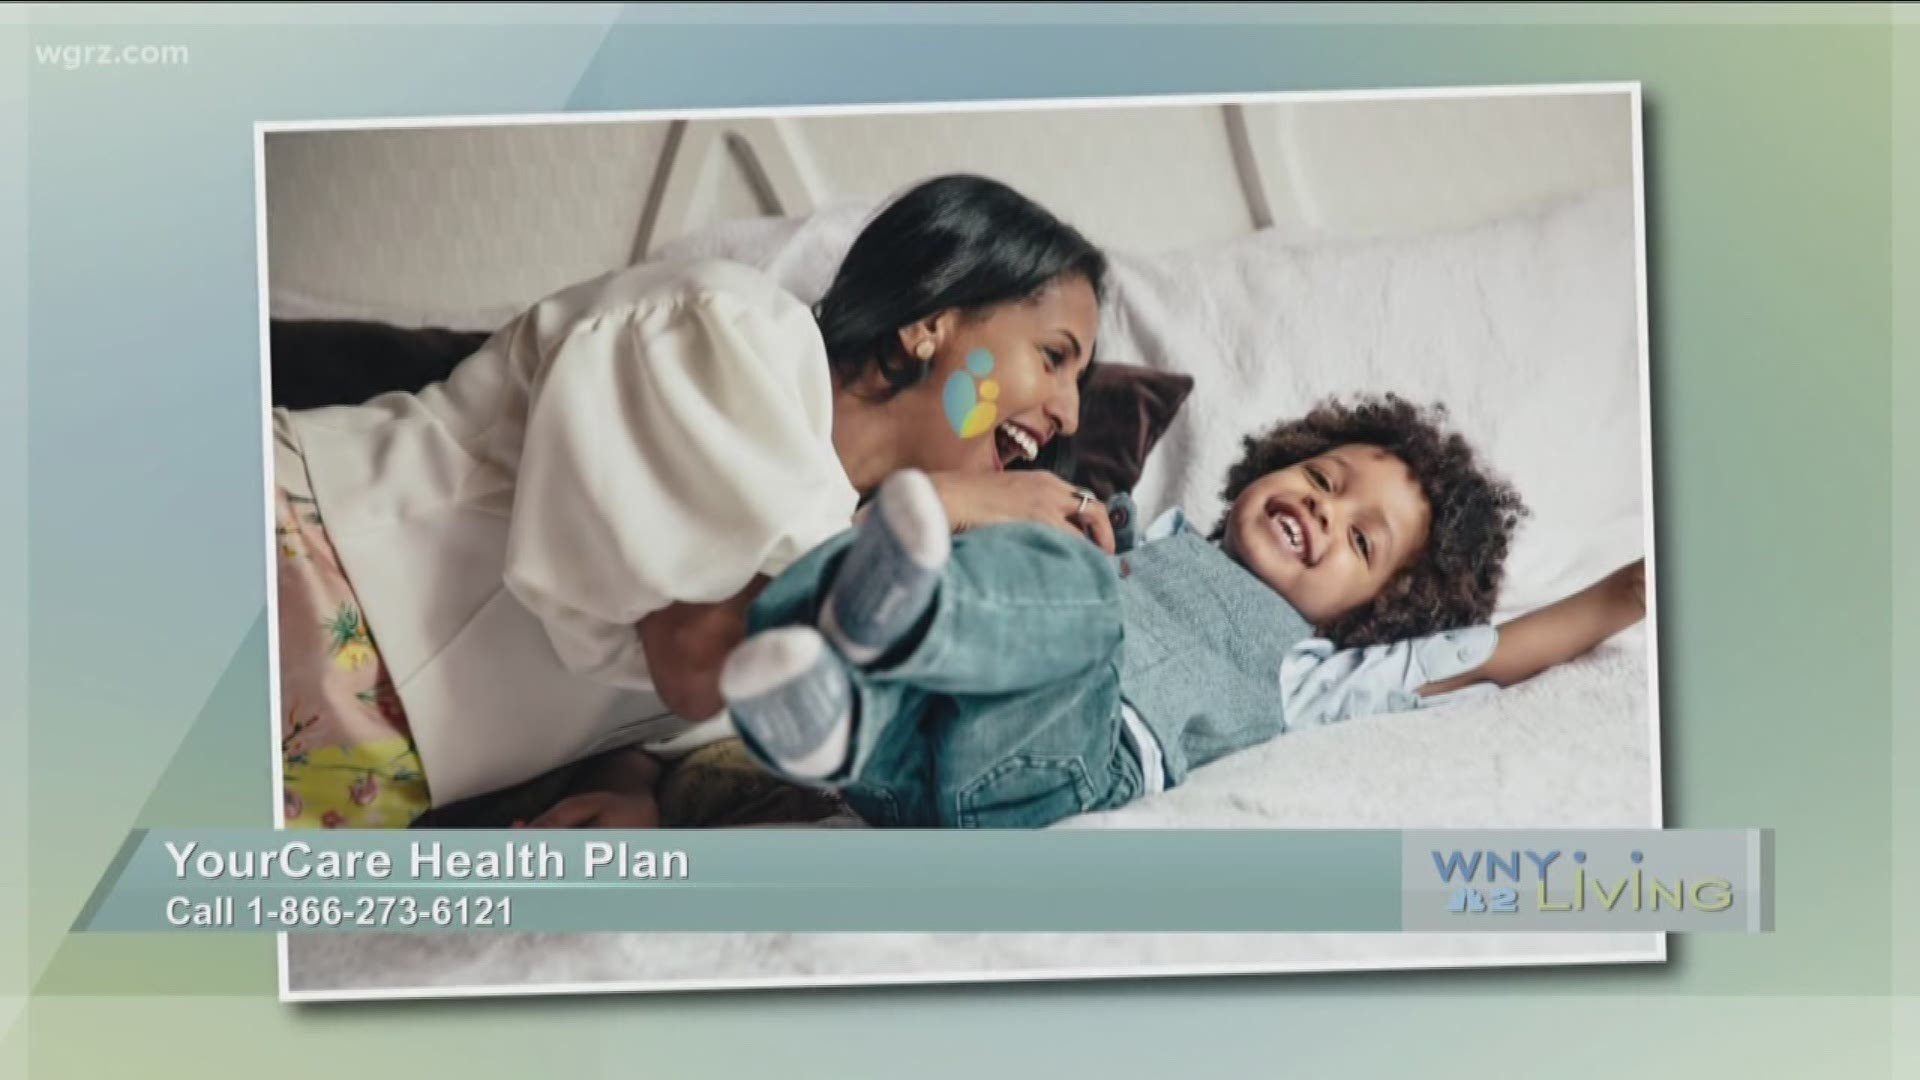 WNY Living - March 4 - YourCare Health Plan